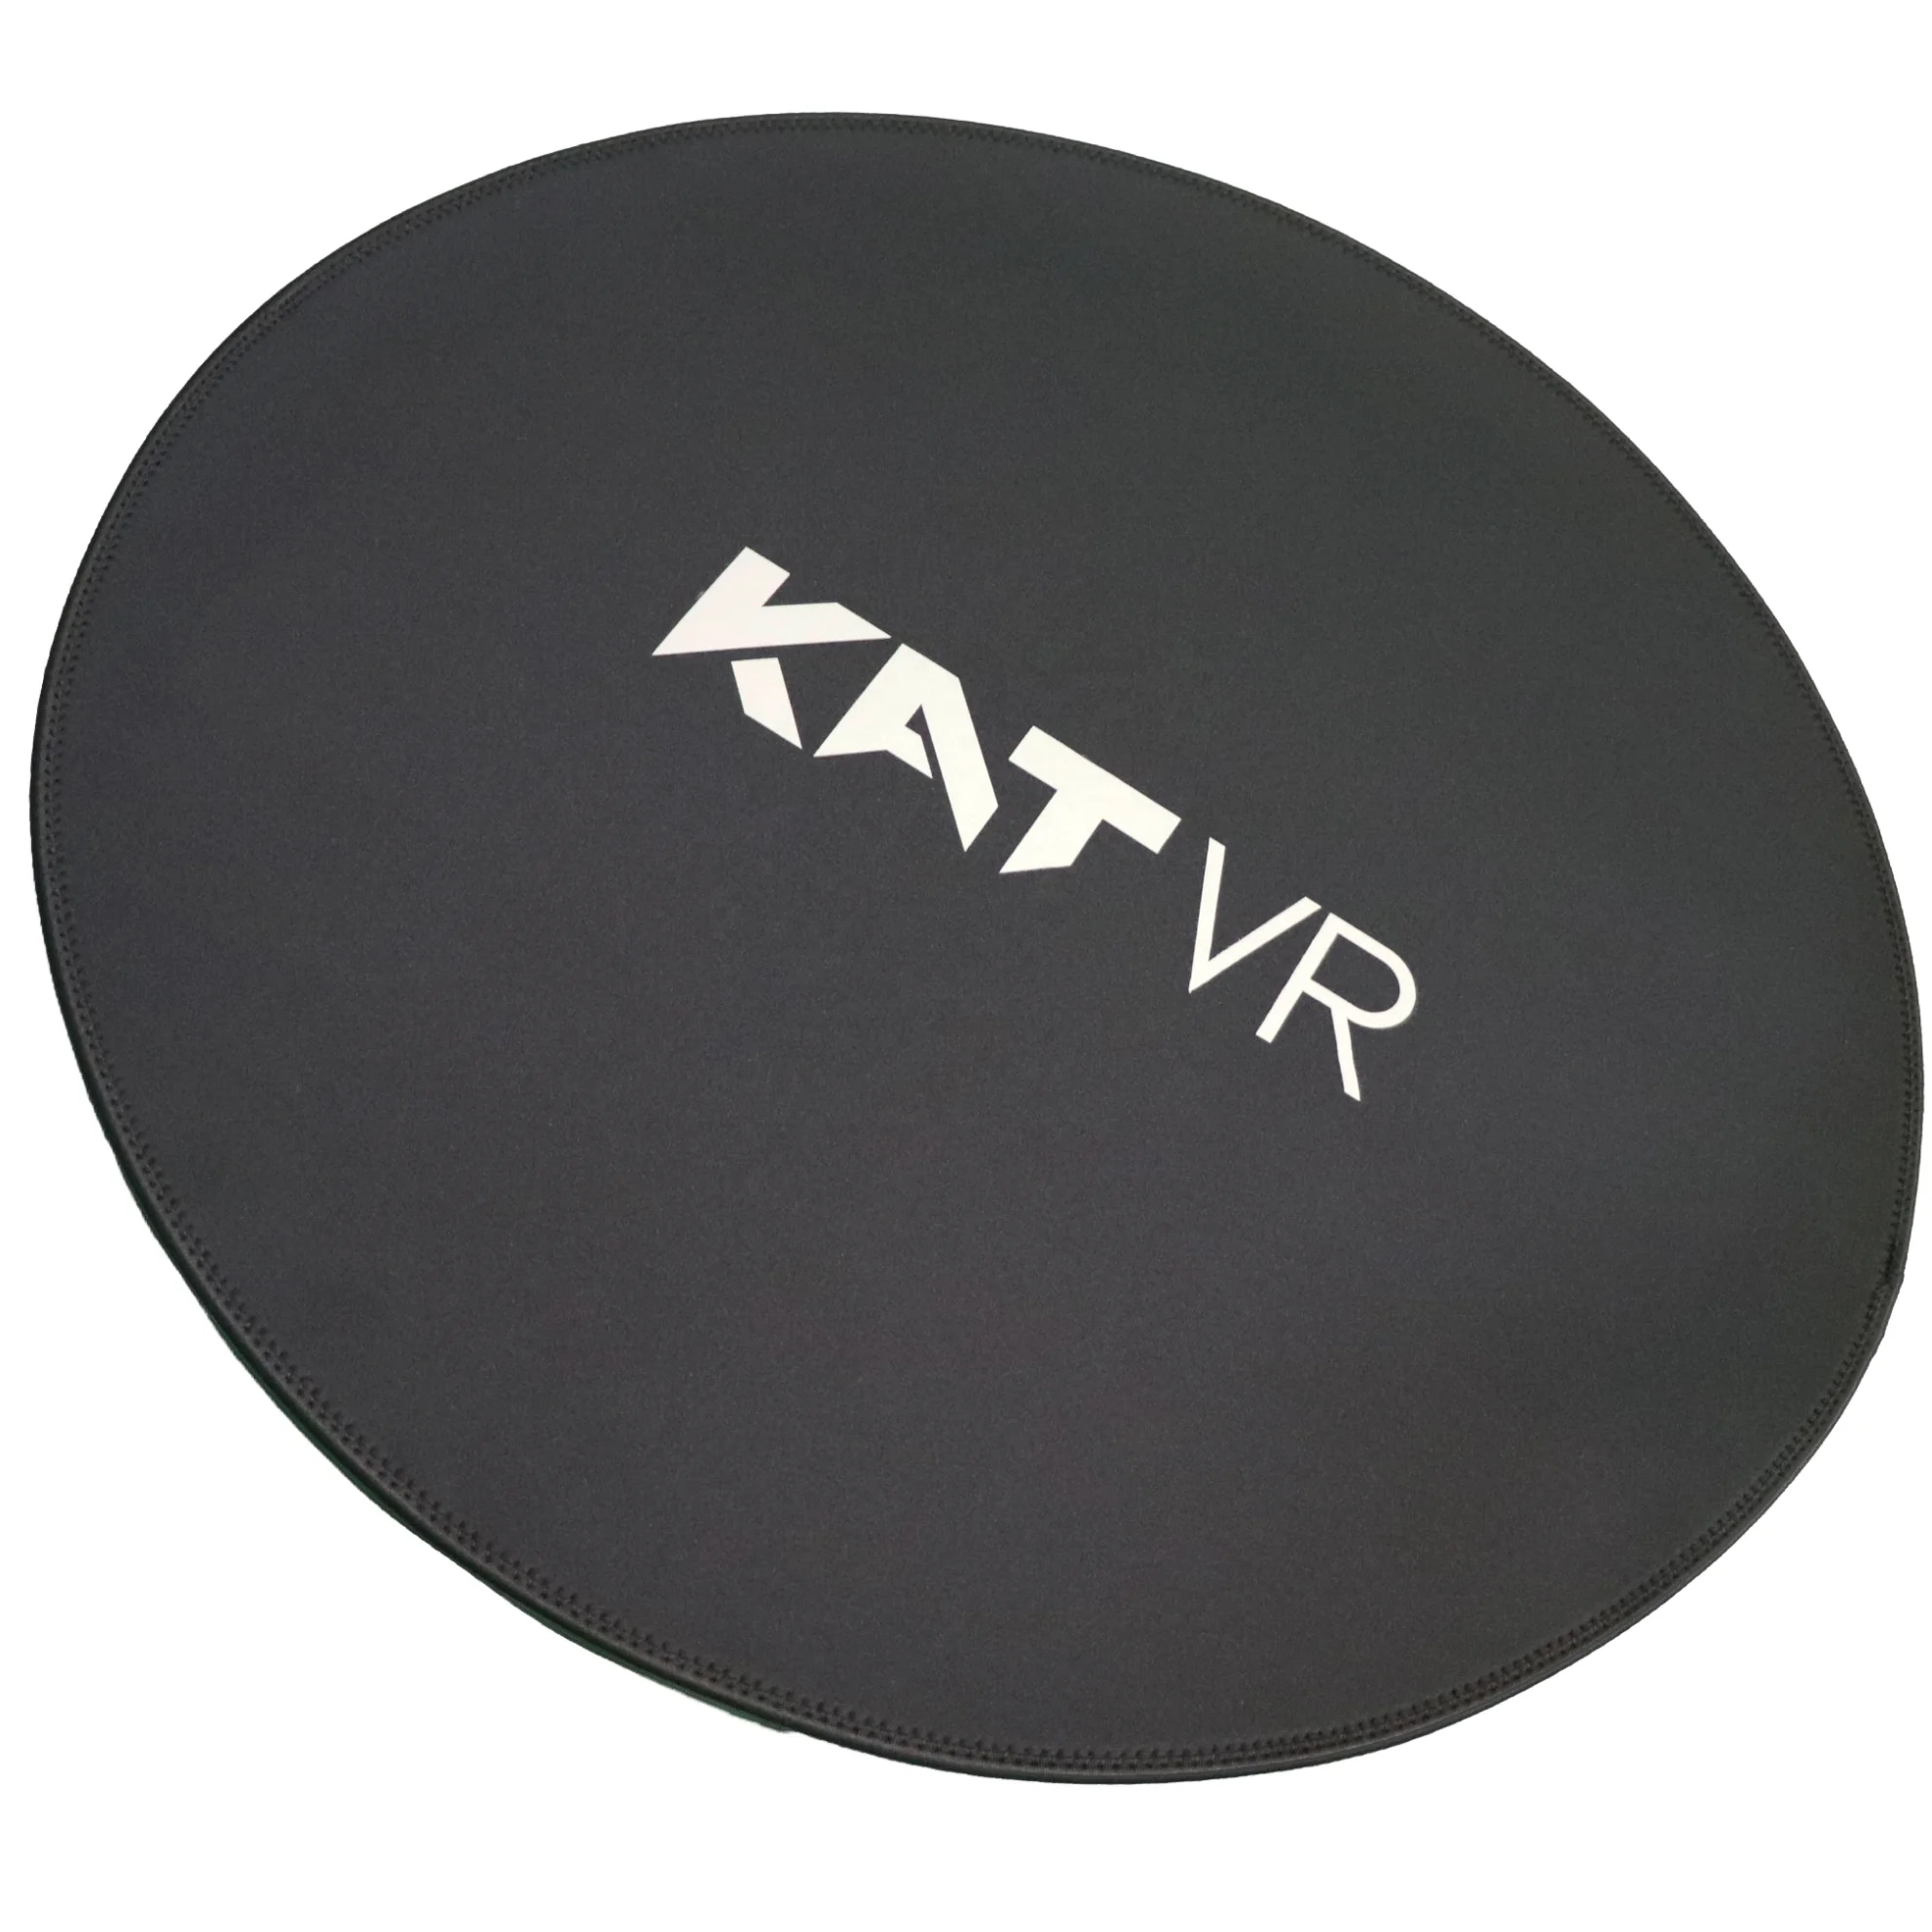 

KAT Loco UPAD VR Gaming Carpet Special Mat Supporting Spatial Orientation In Virtual Reality